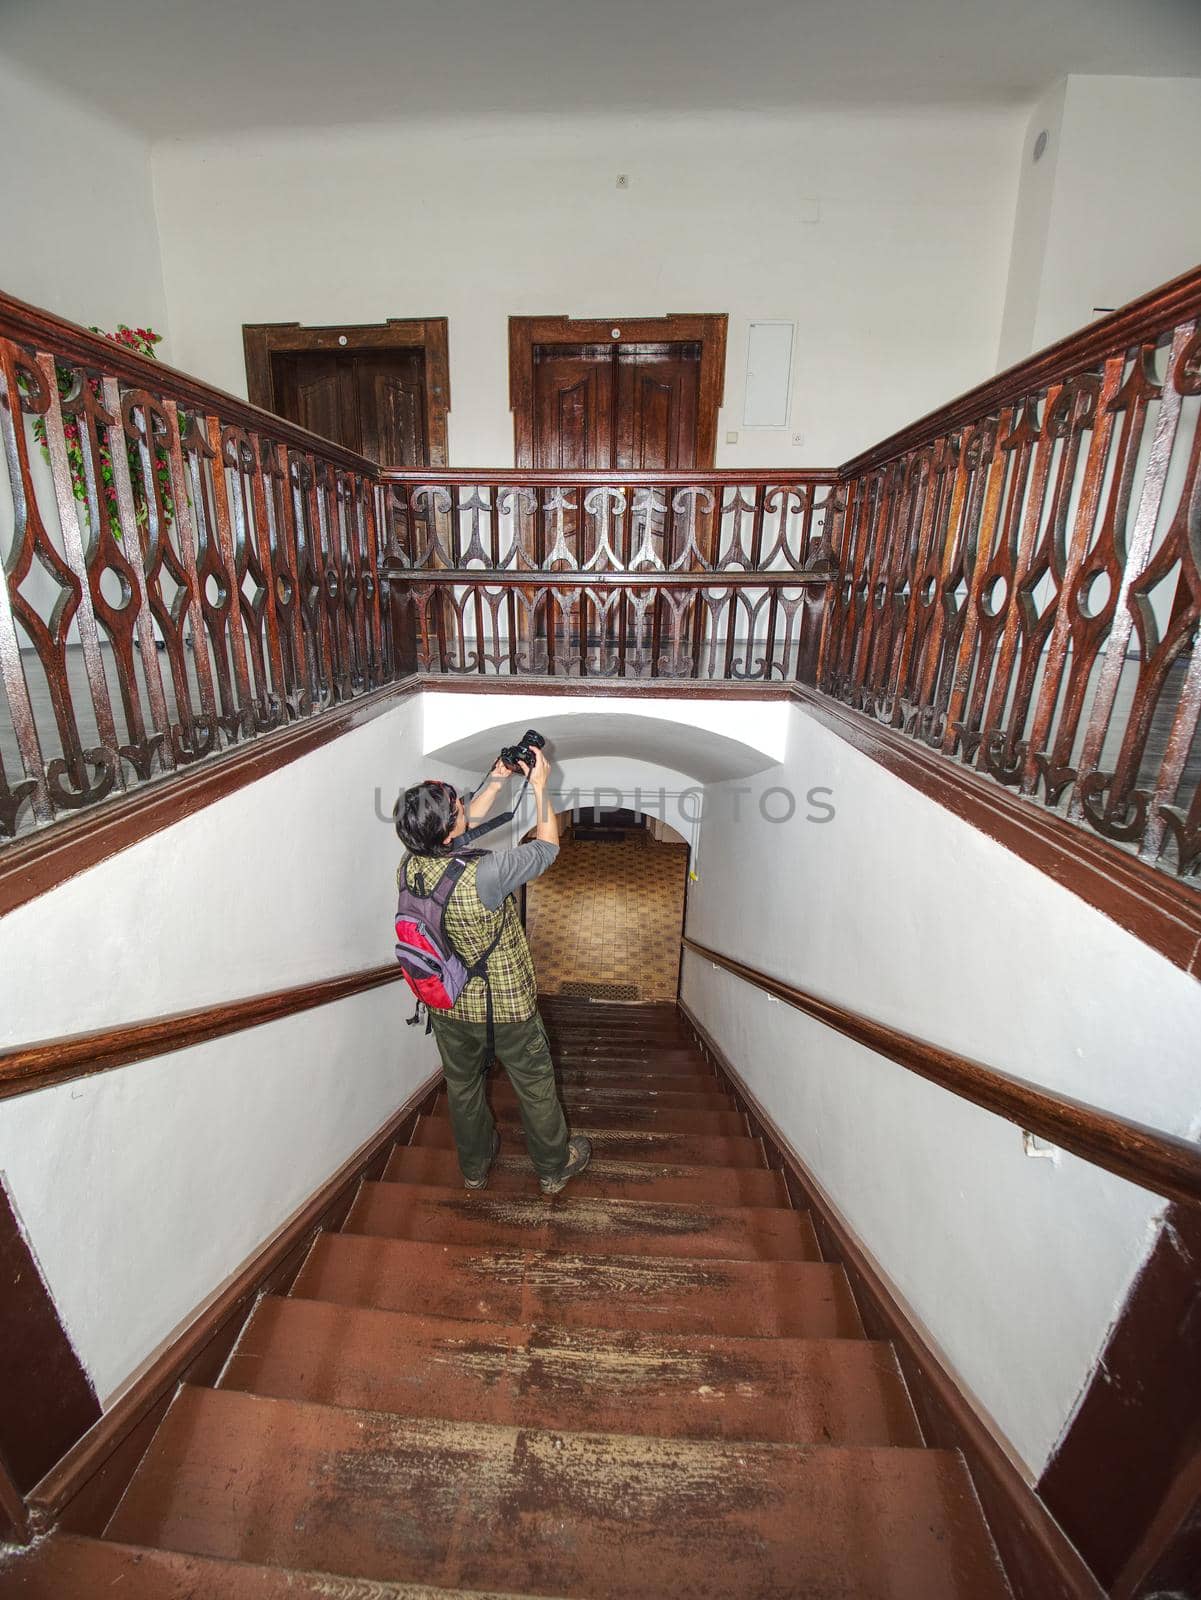 Black hair woman photographer study interier of old house with renewal wooden stairs and wooden handrails around staircase.